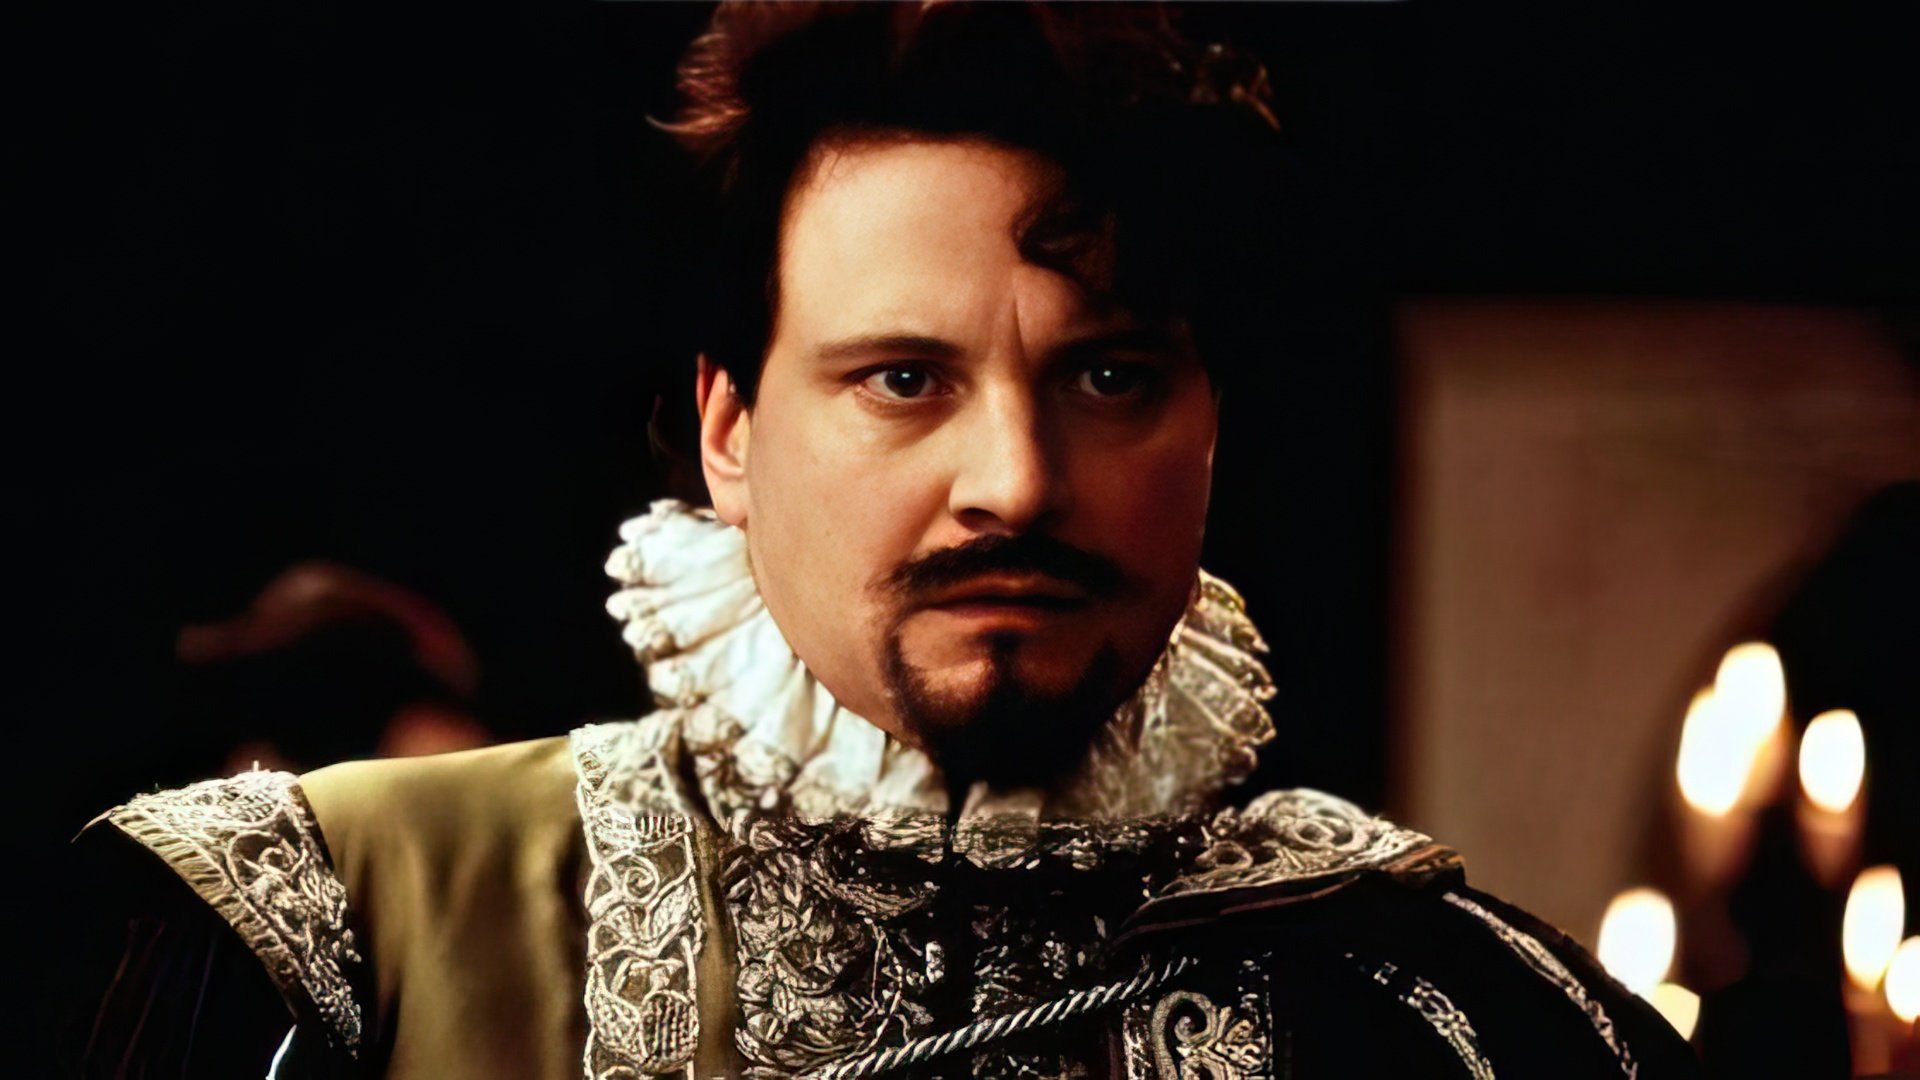 »Shakespeare in Love»: Colin Firth as the Lord Wessex